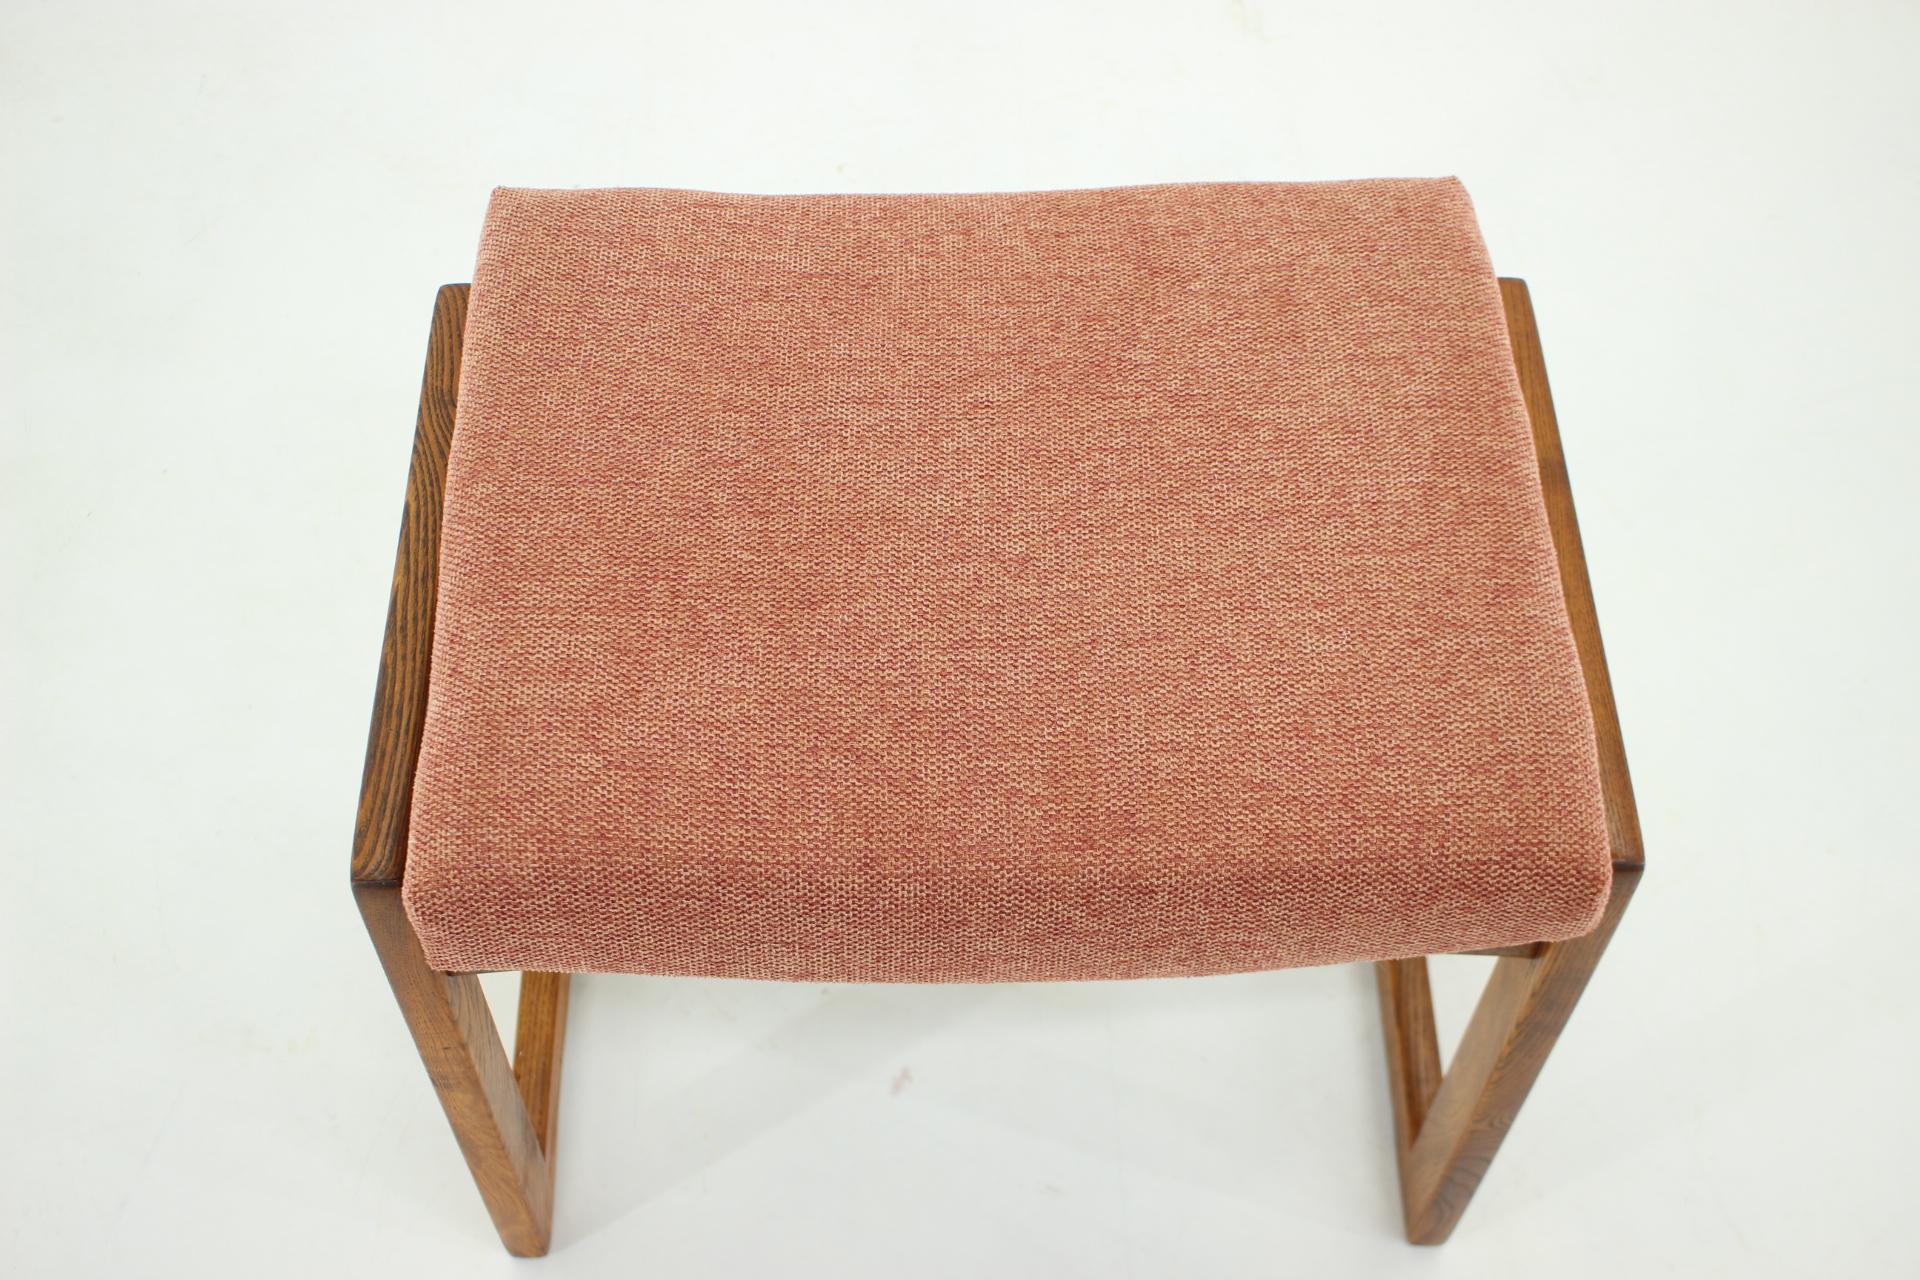 Late 20th Century 1970s Beech and Fabric Stool or Tabouret, Czechoslovakia